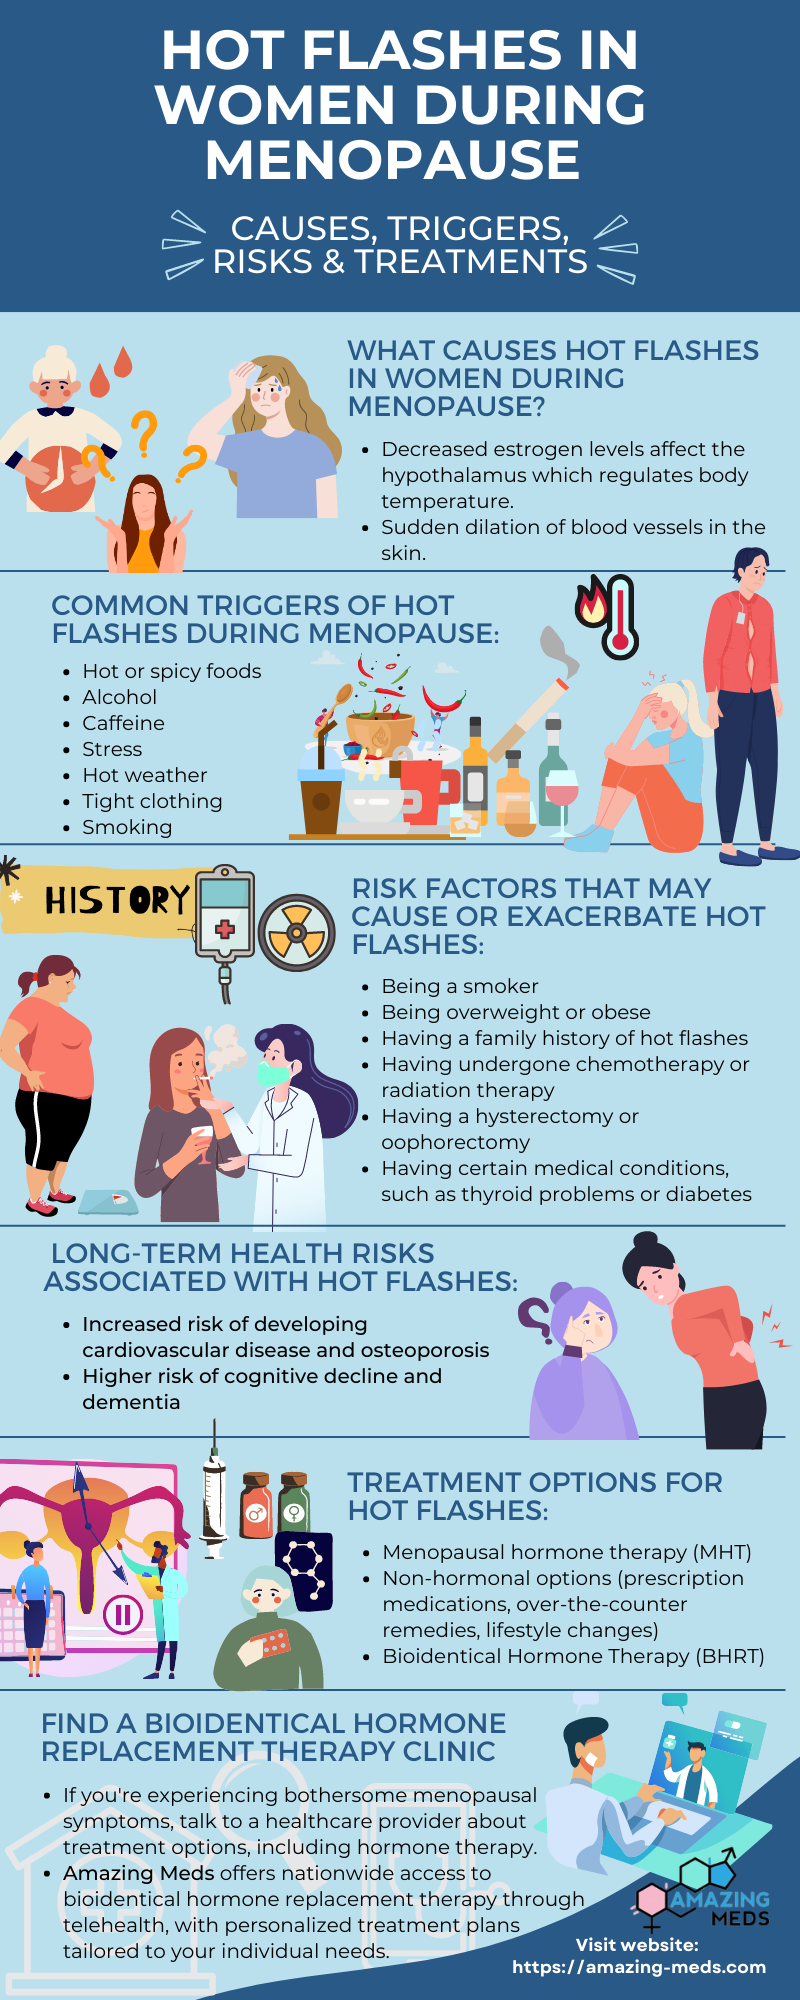 What Causes Hot Flashes in Women During Menopause